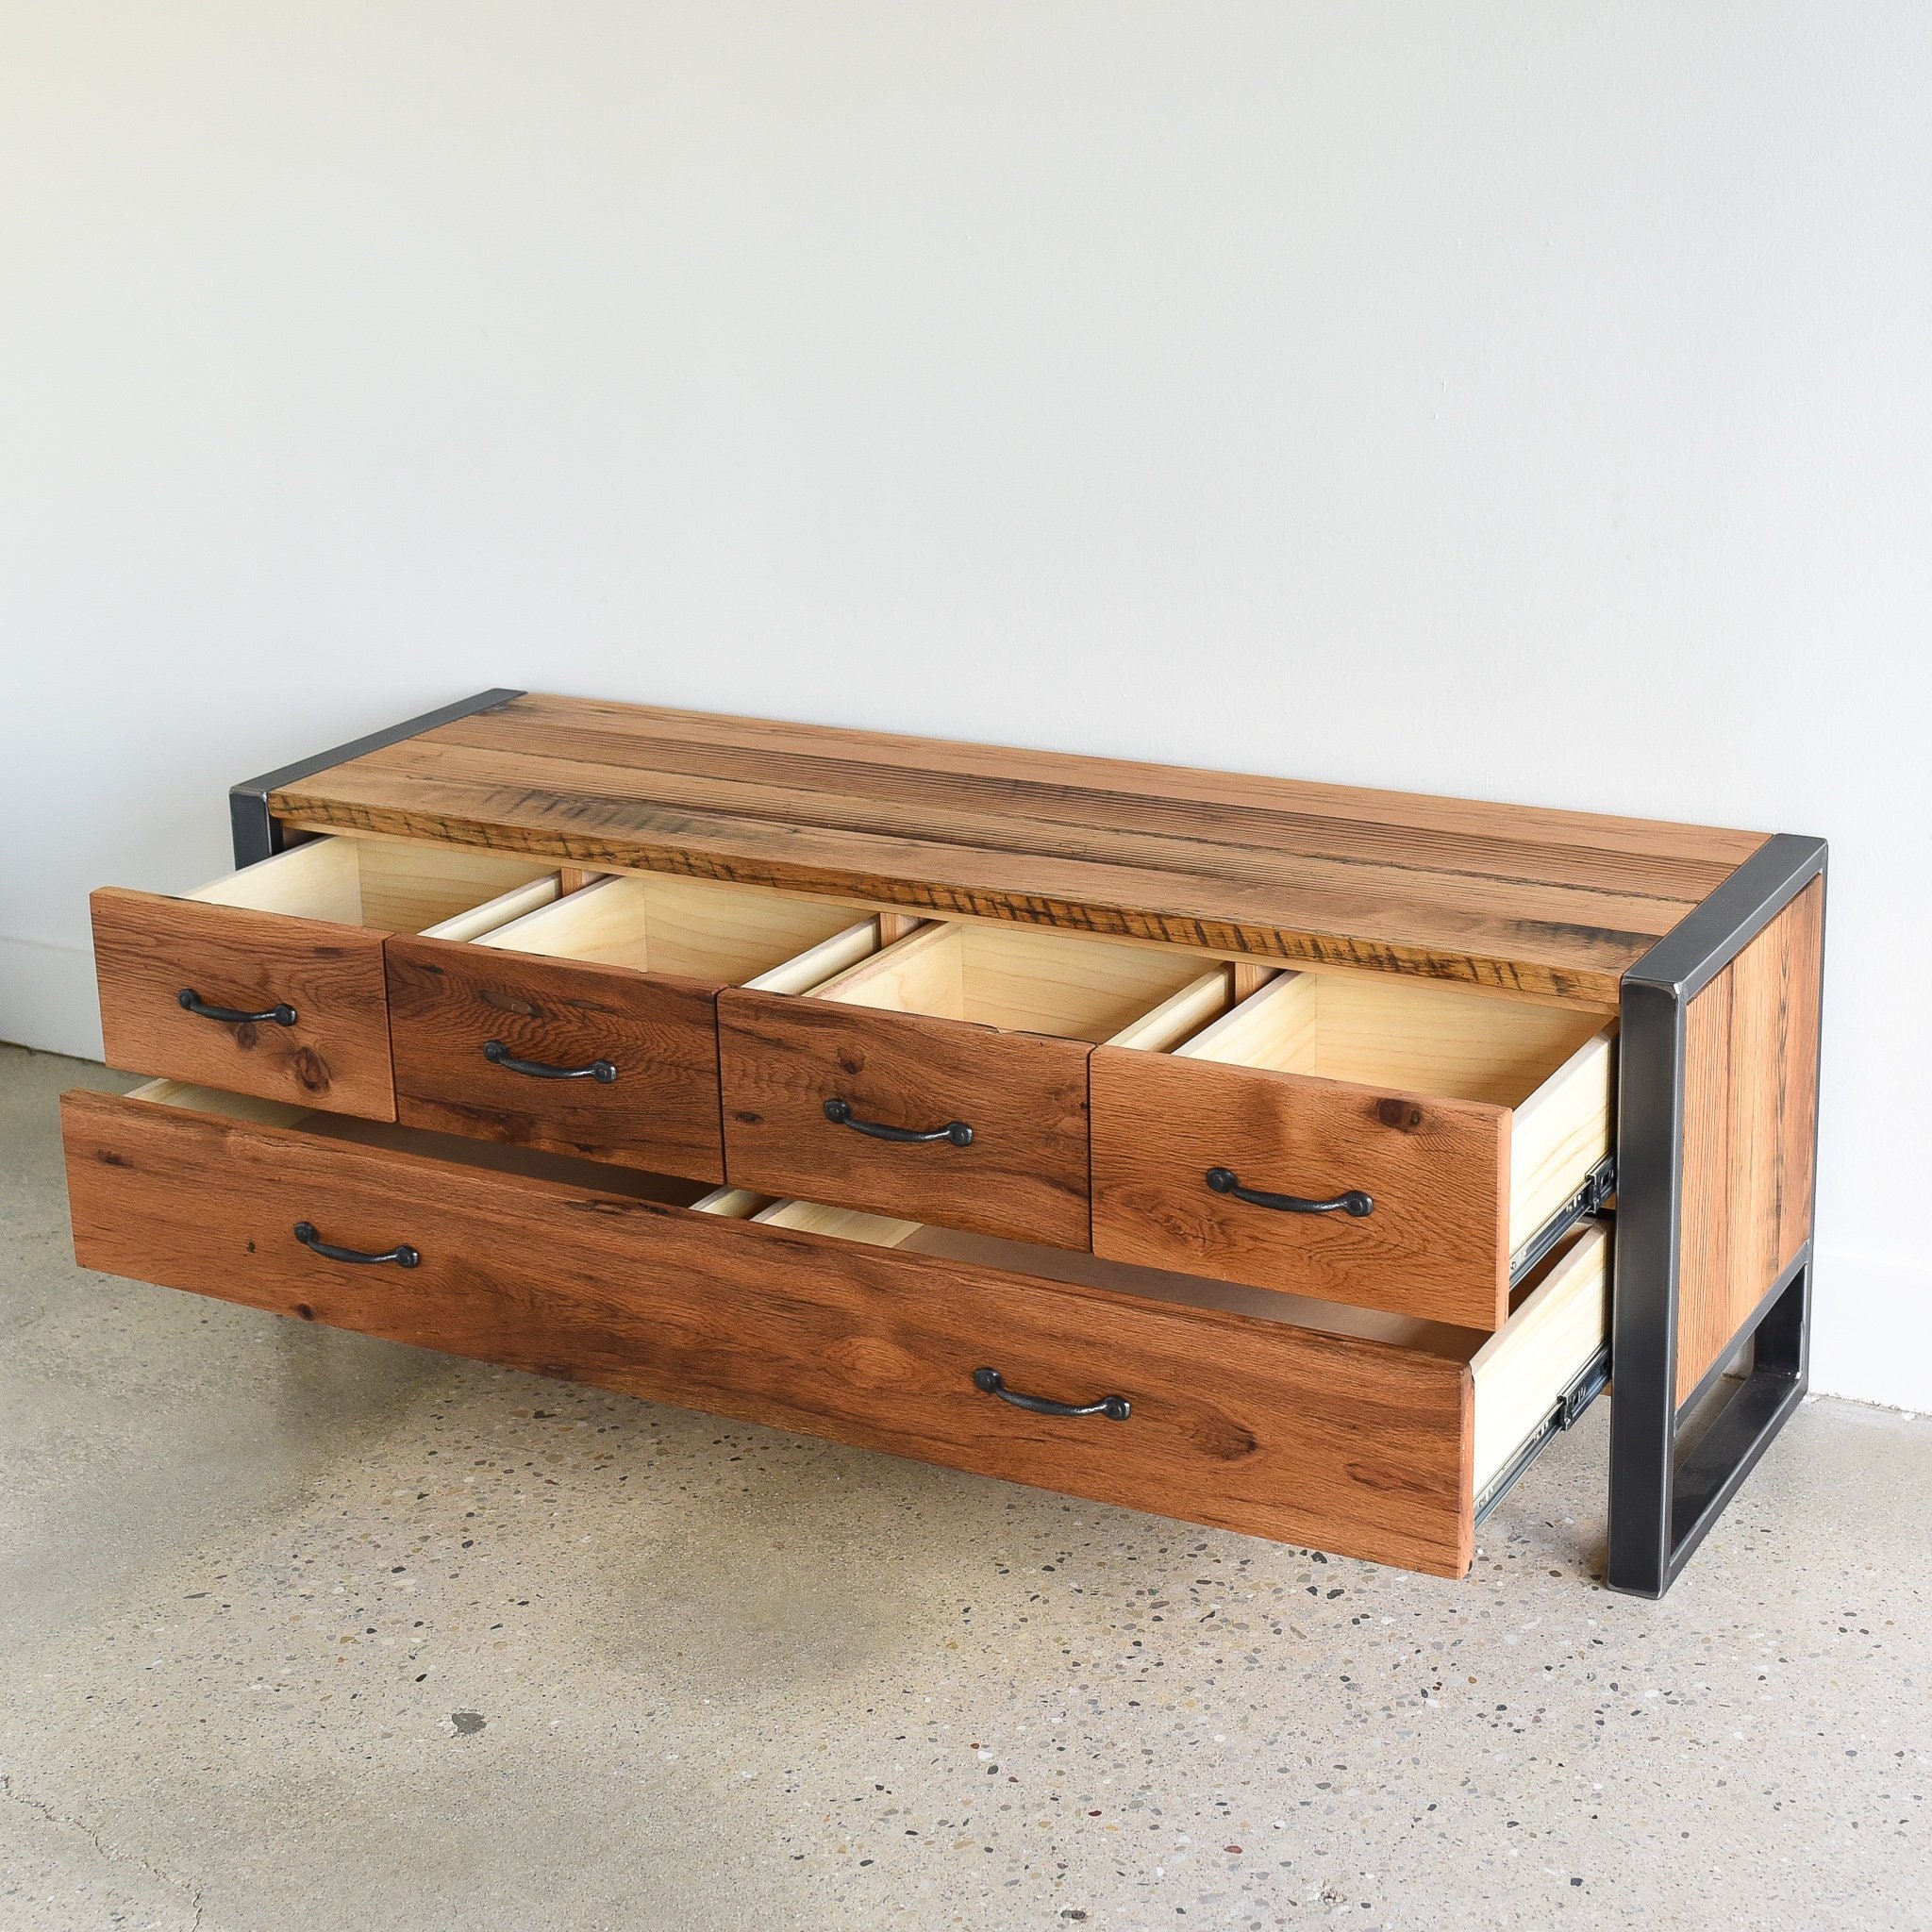 60 Storage Bench Entryway Reclaimed Wood 5 Drawer Etsy